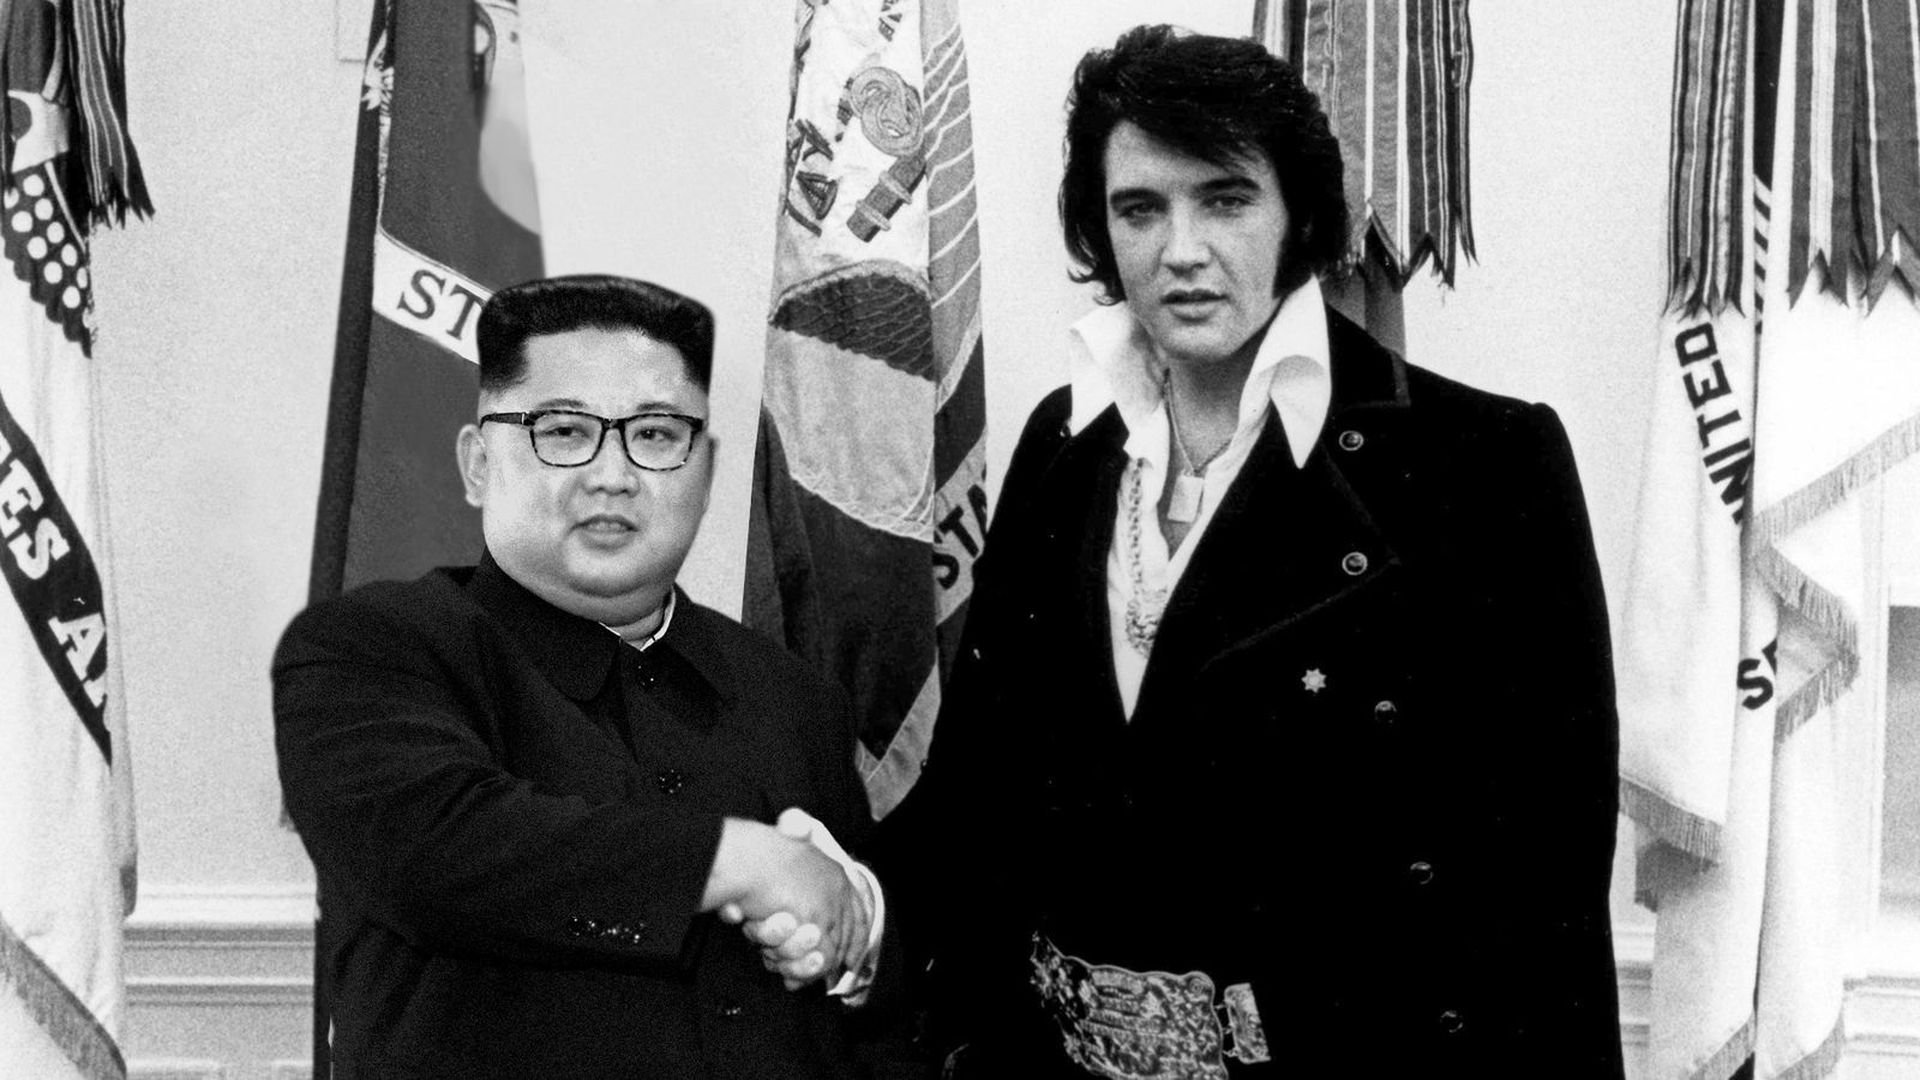 Photoshopped image of Elvis shaking hands with Kim Jong-Un